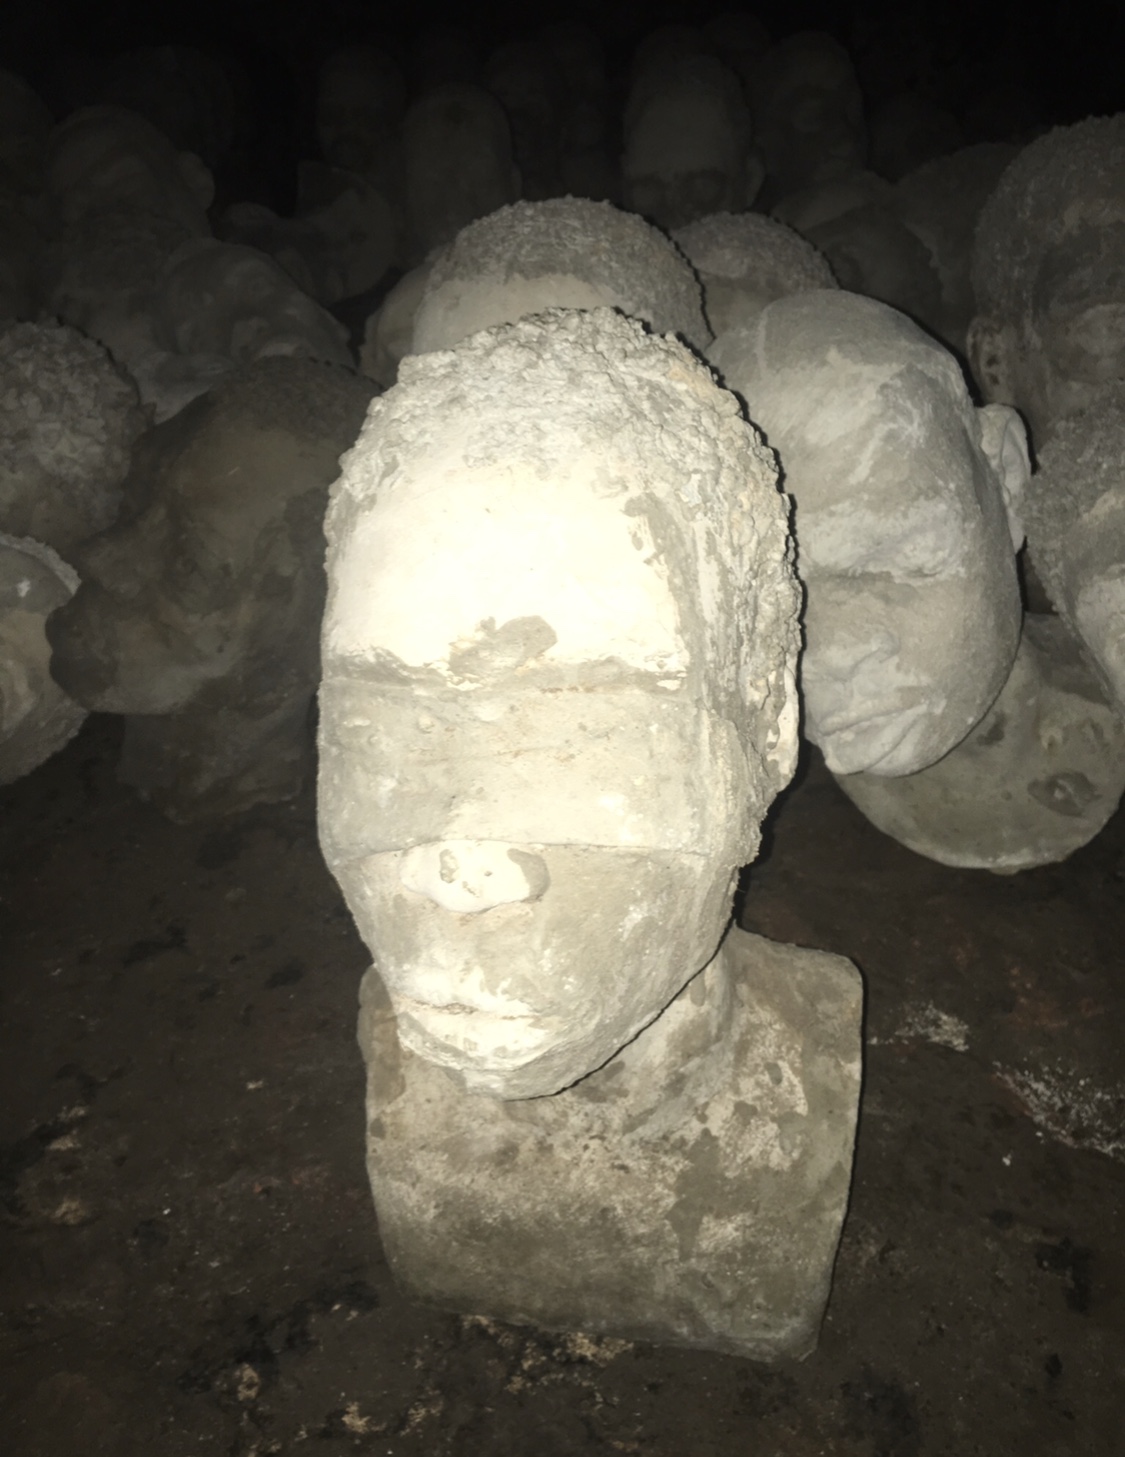  In the dungeons, 1,300 concrete heads are on display that depict some of the lives that were transplanted. Each is different and show the possible faces of Africans slaved at Cape Coast Castle. 